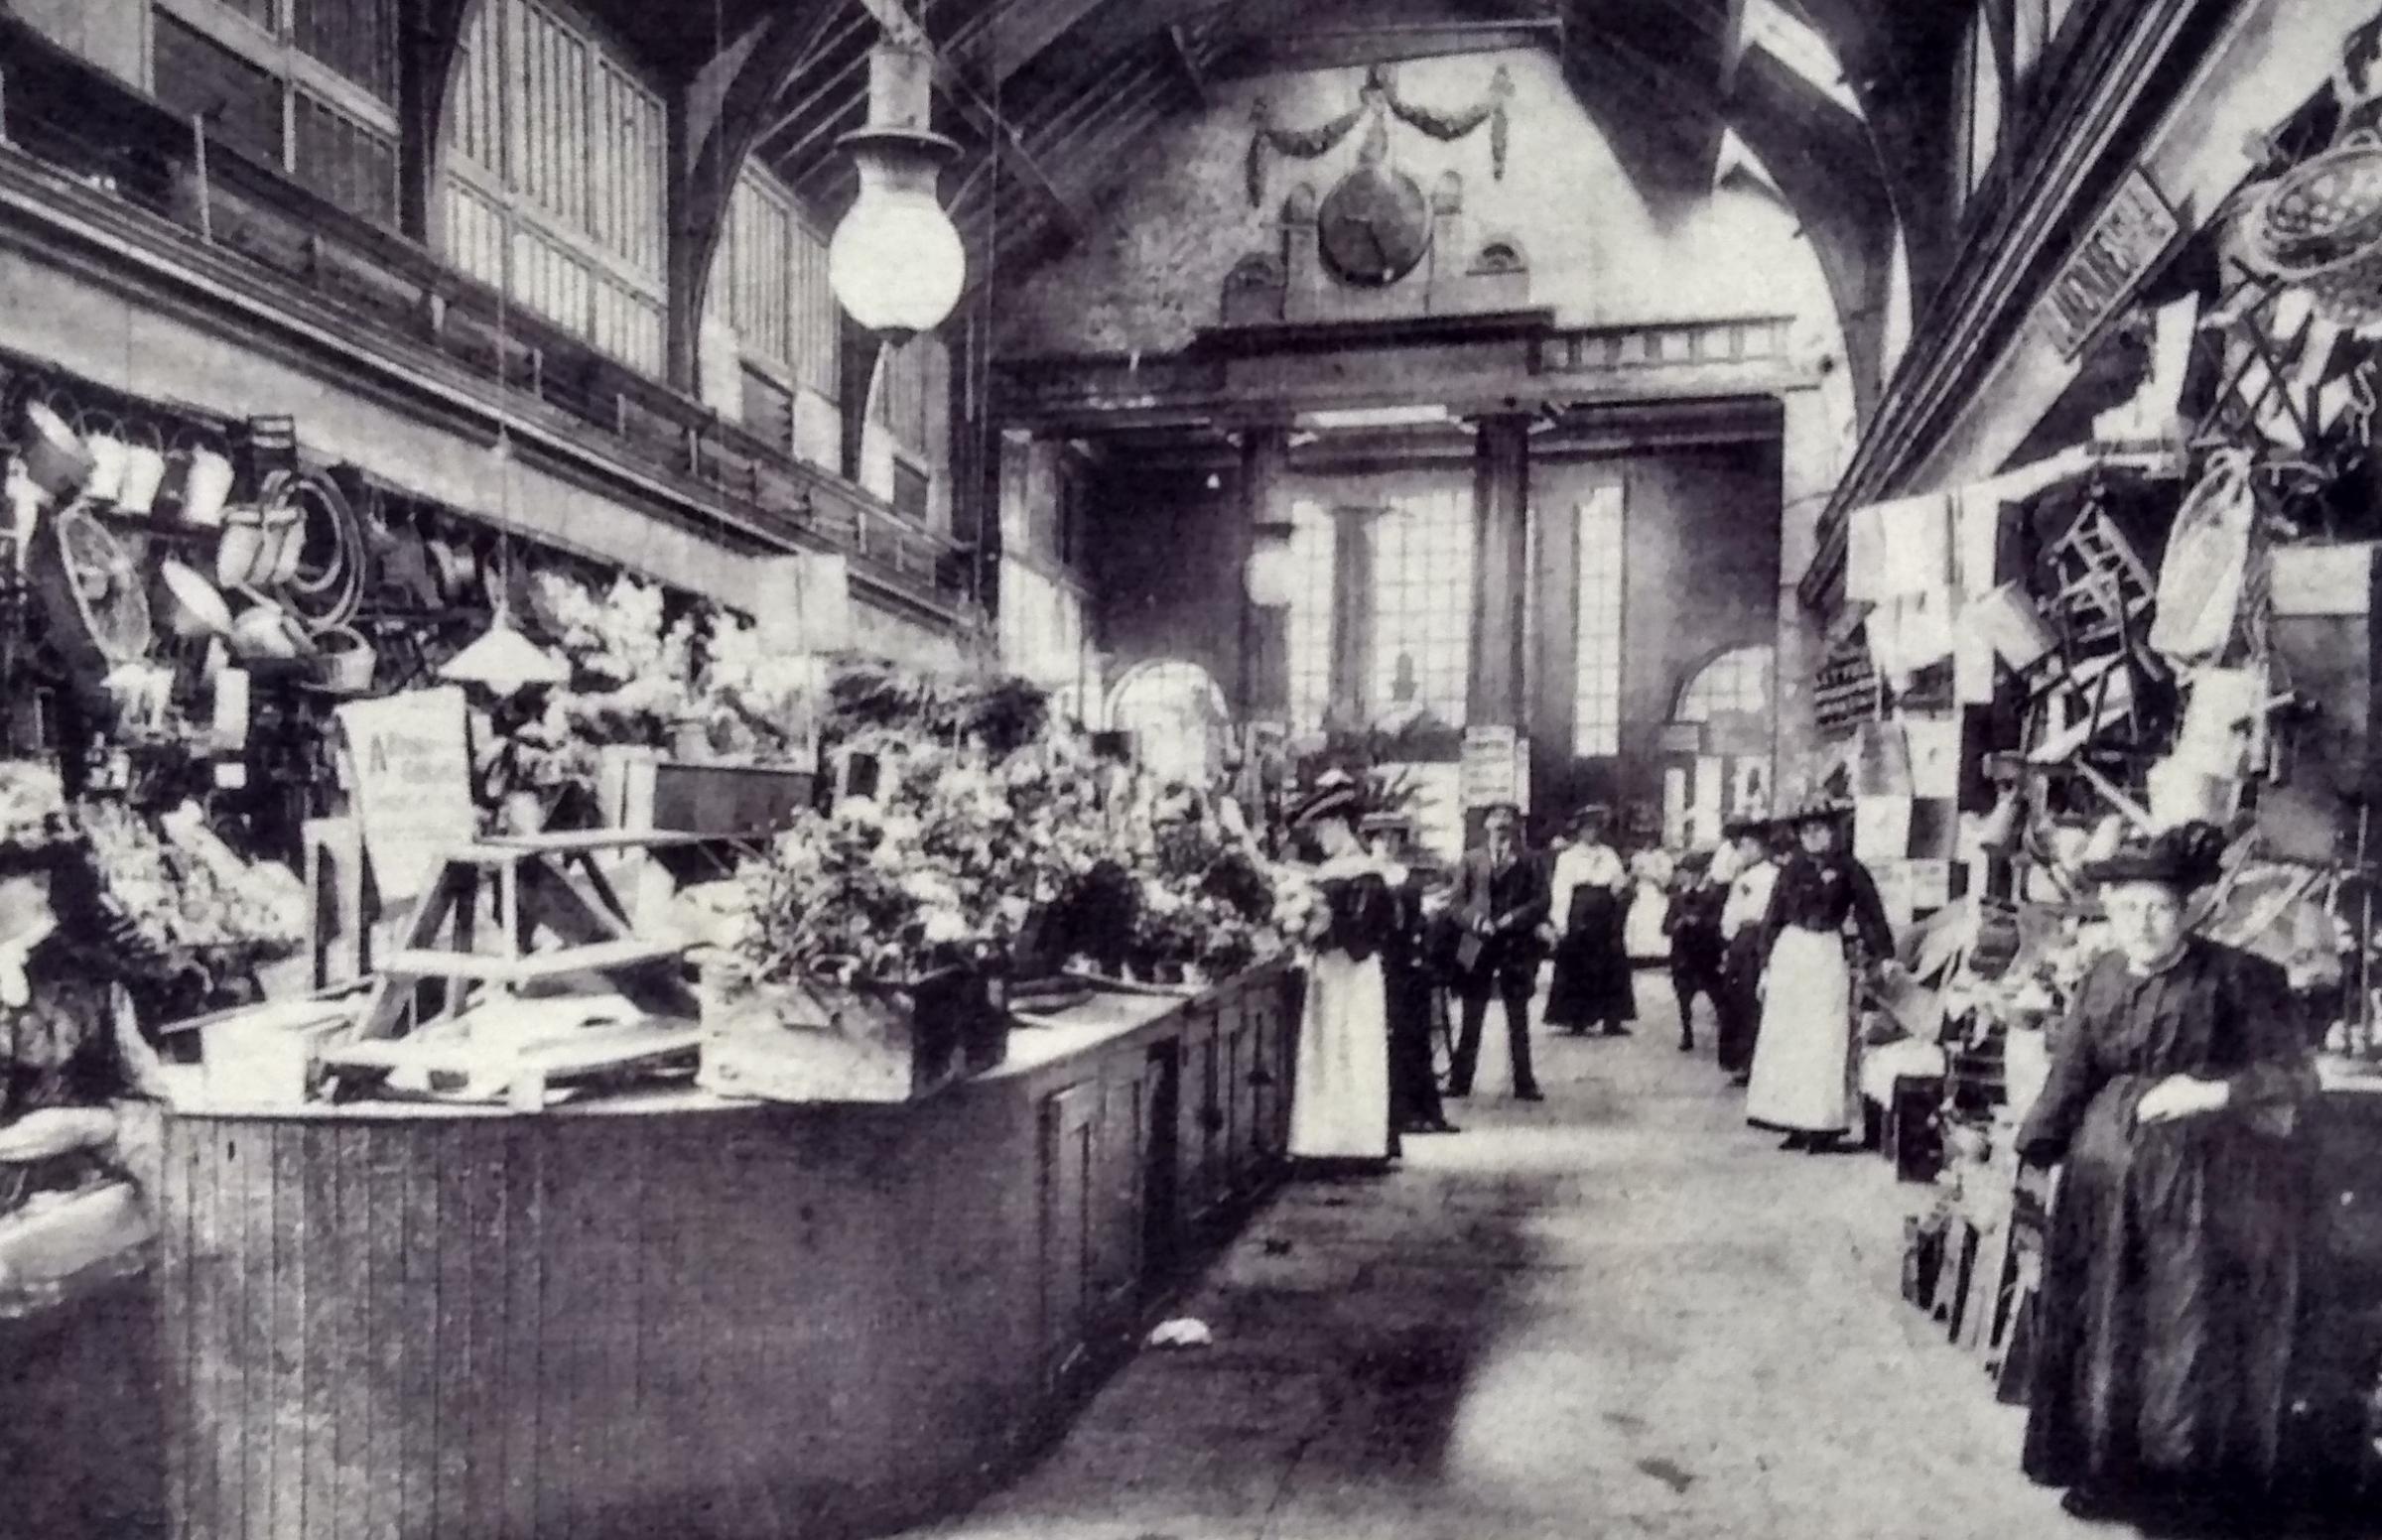 How the Market Hall looked during the reign of Edward VII